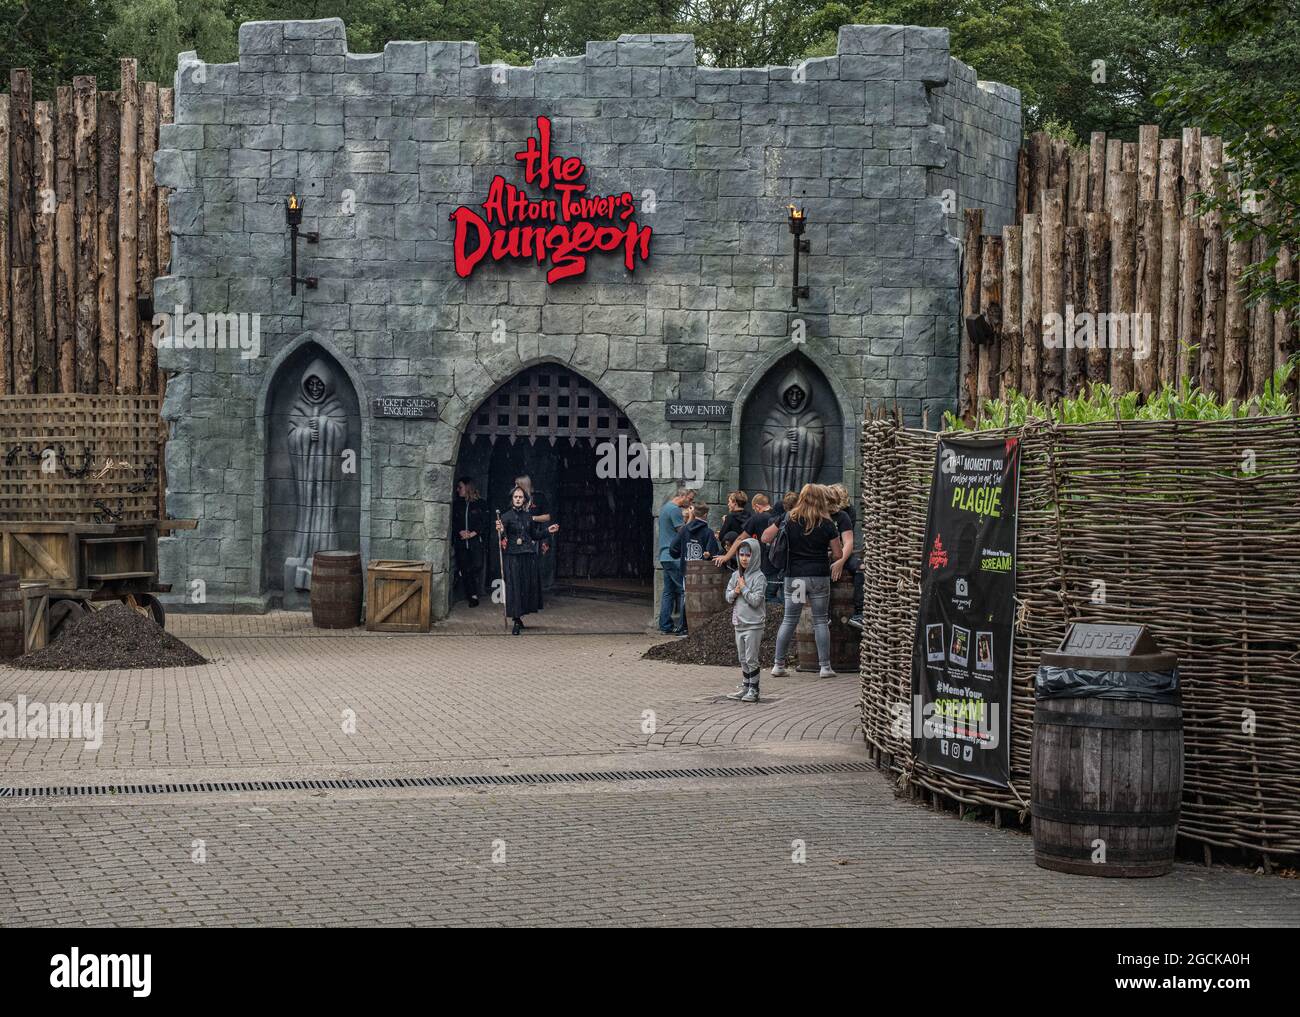 The Alton Towers Dungeons Interactive Attraction Alton Towers Theme Park Staffordshire England Stock Photo